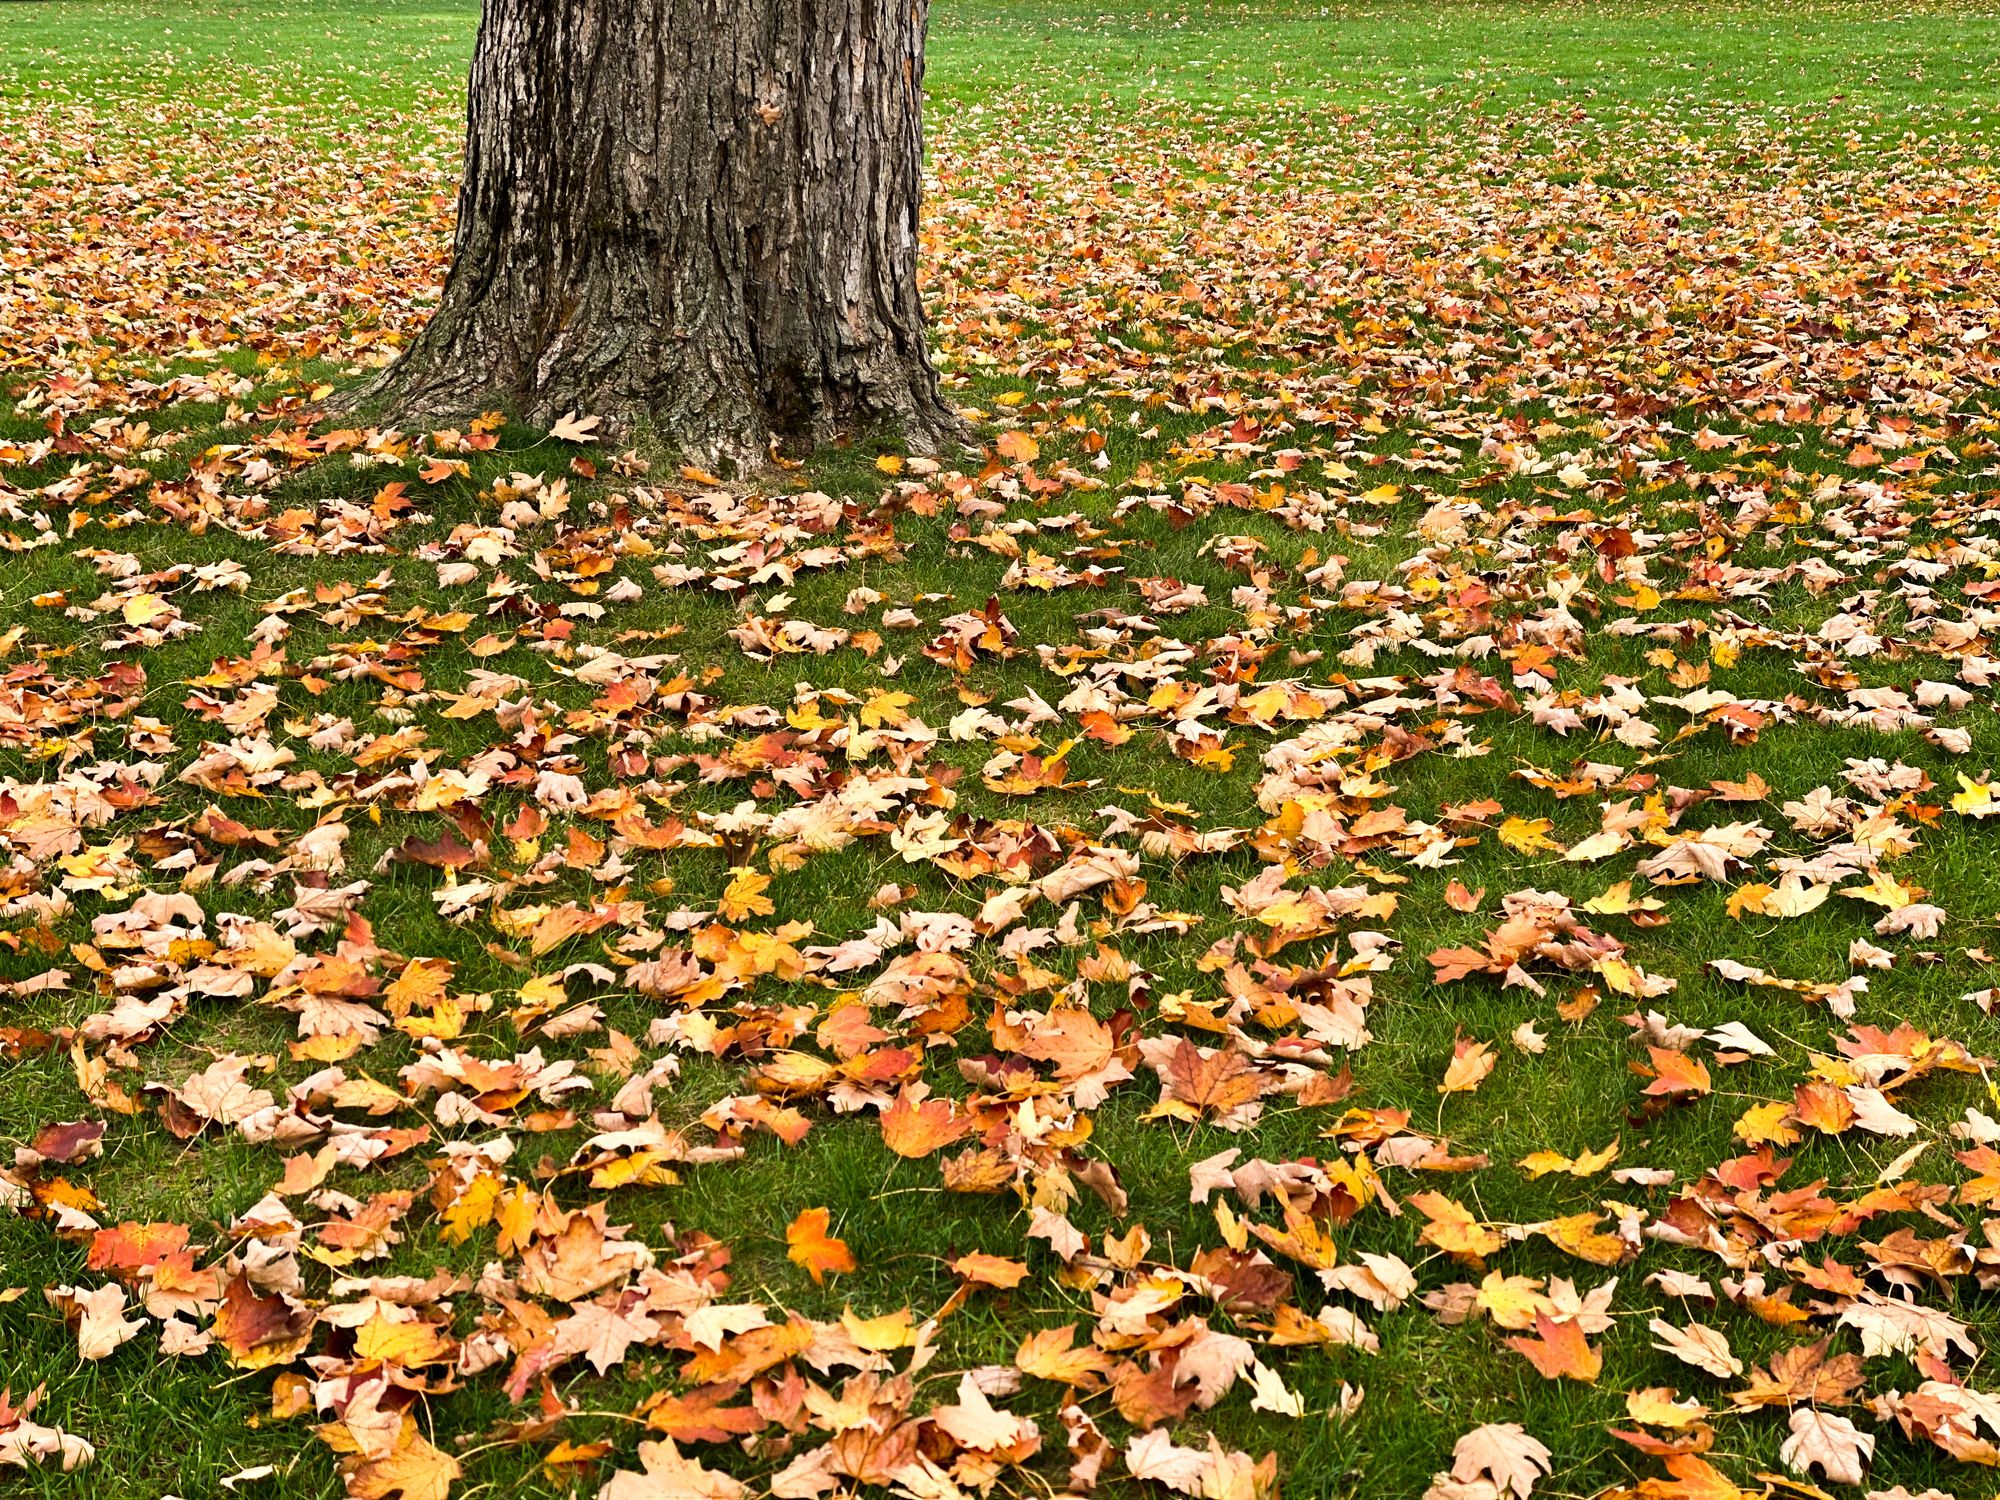 https://hips.hearstapps.com/hmg-prod/images/vibrant-multicolored-leaves-on-grass-in-autumn-royalty-free-image-1686162289.jpg